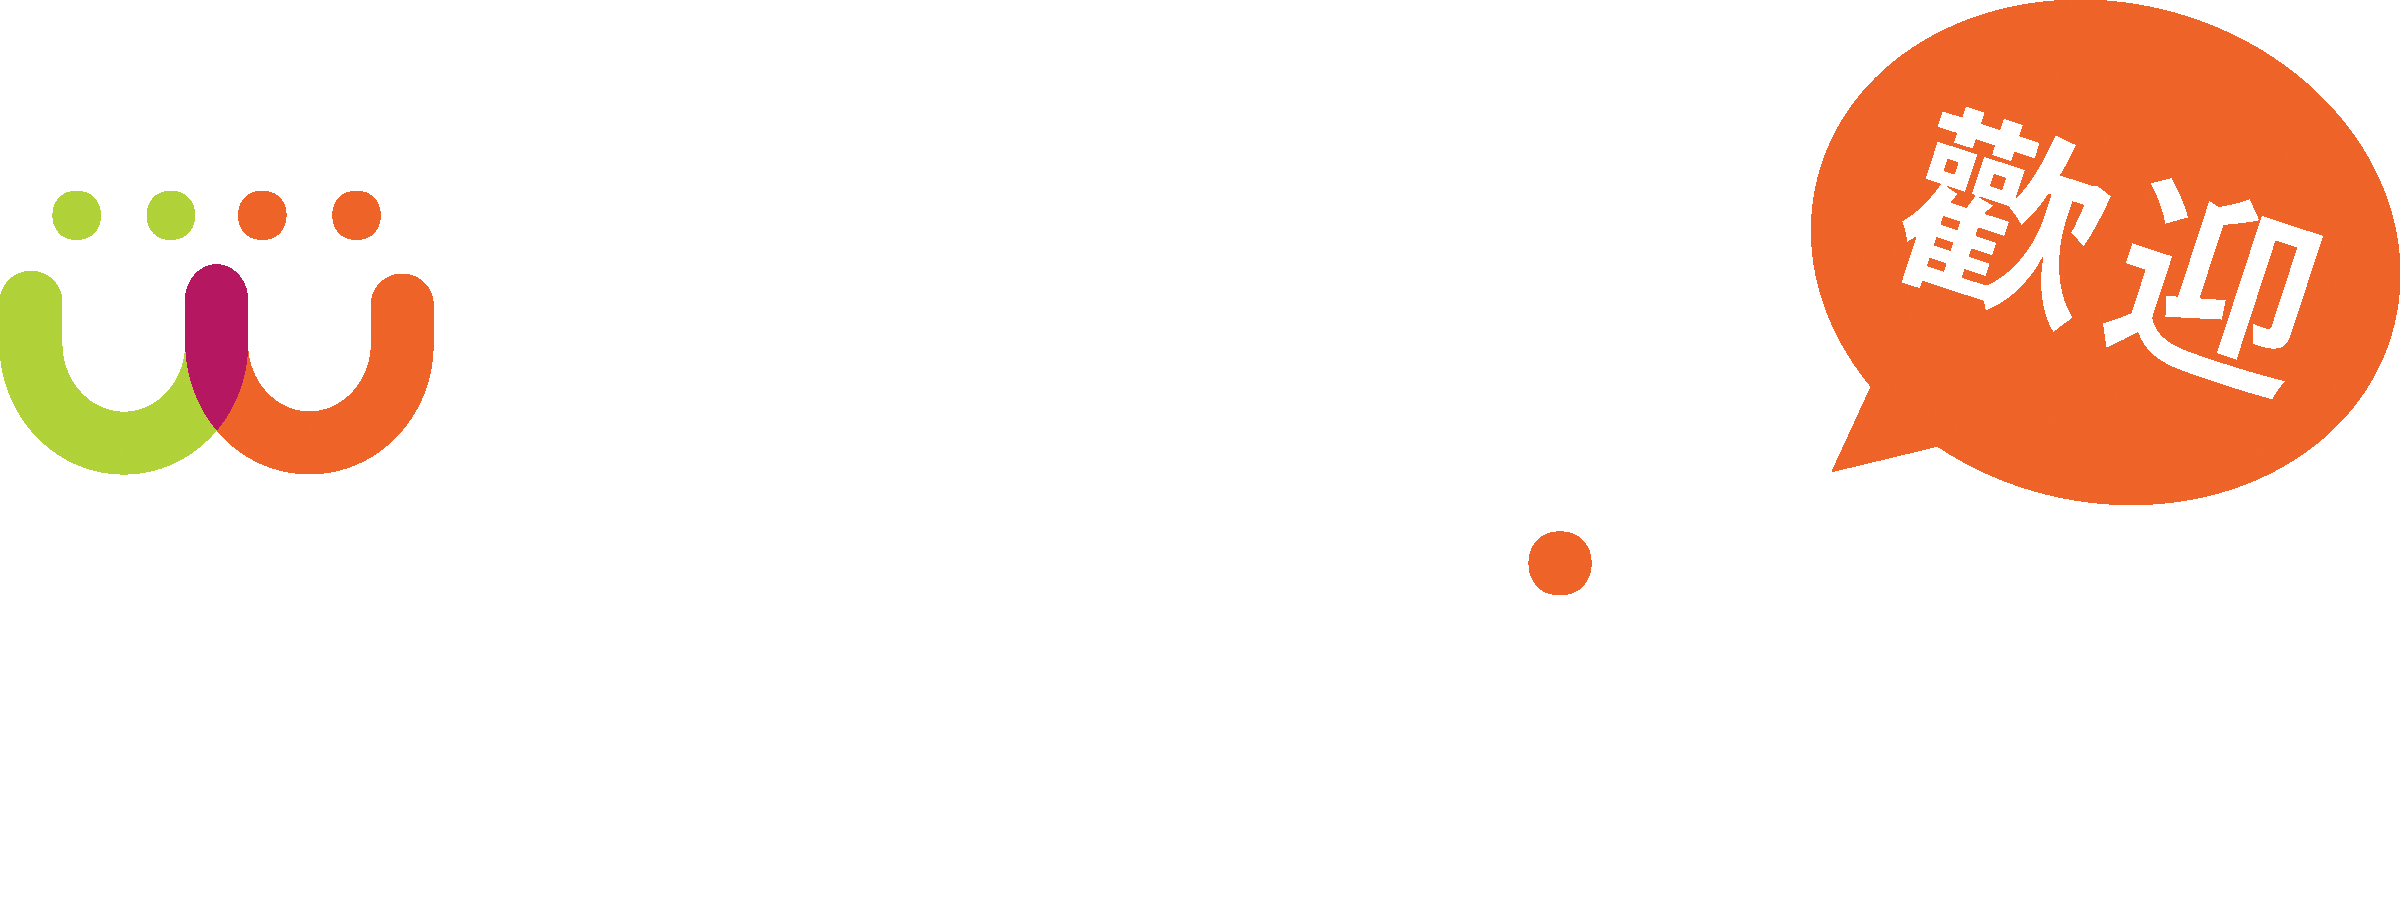 Welcome Reading